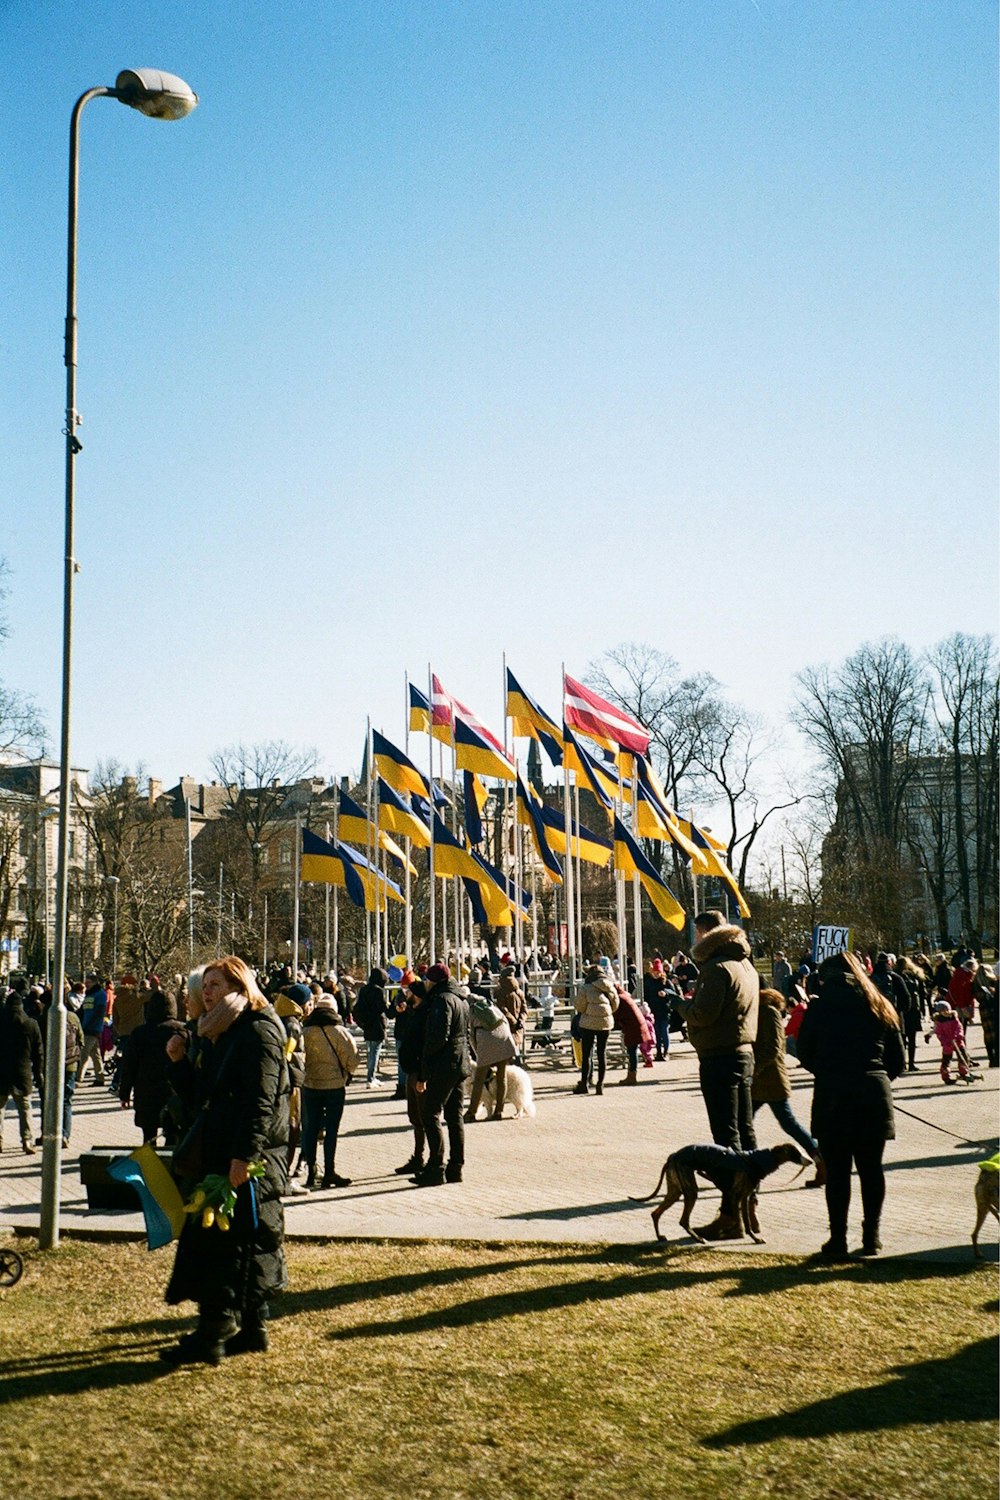 a crowd of people walking down a street next to flags